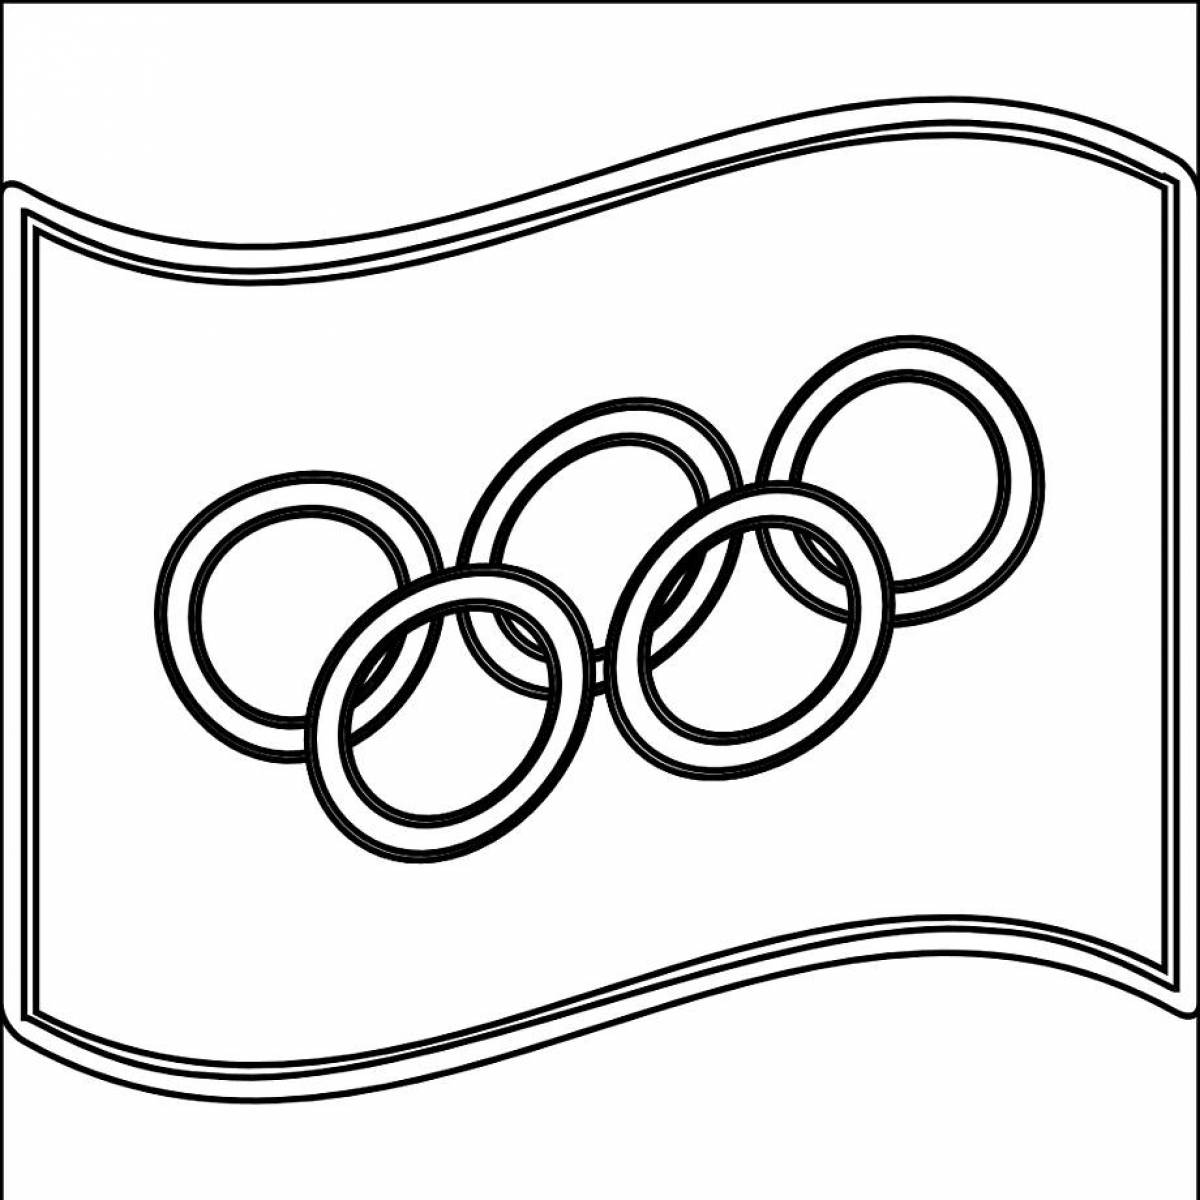 Colourful olympic rings coloring book